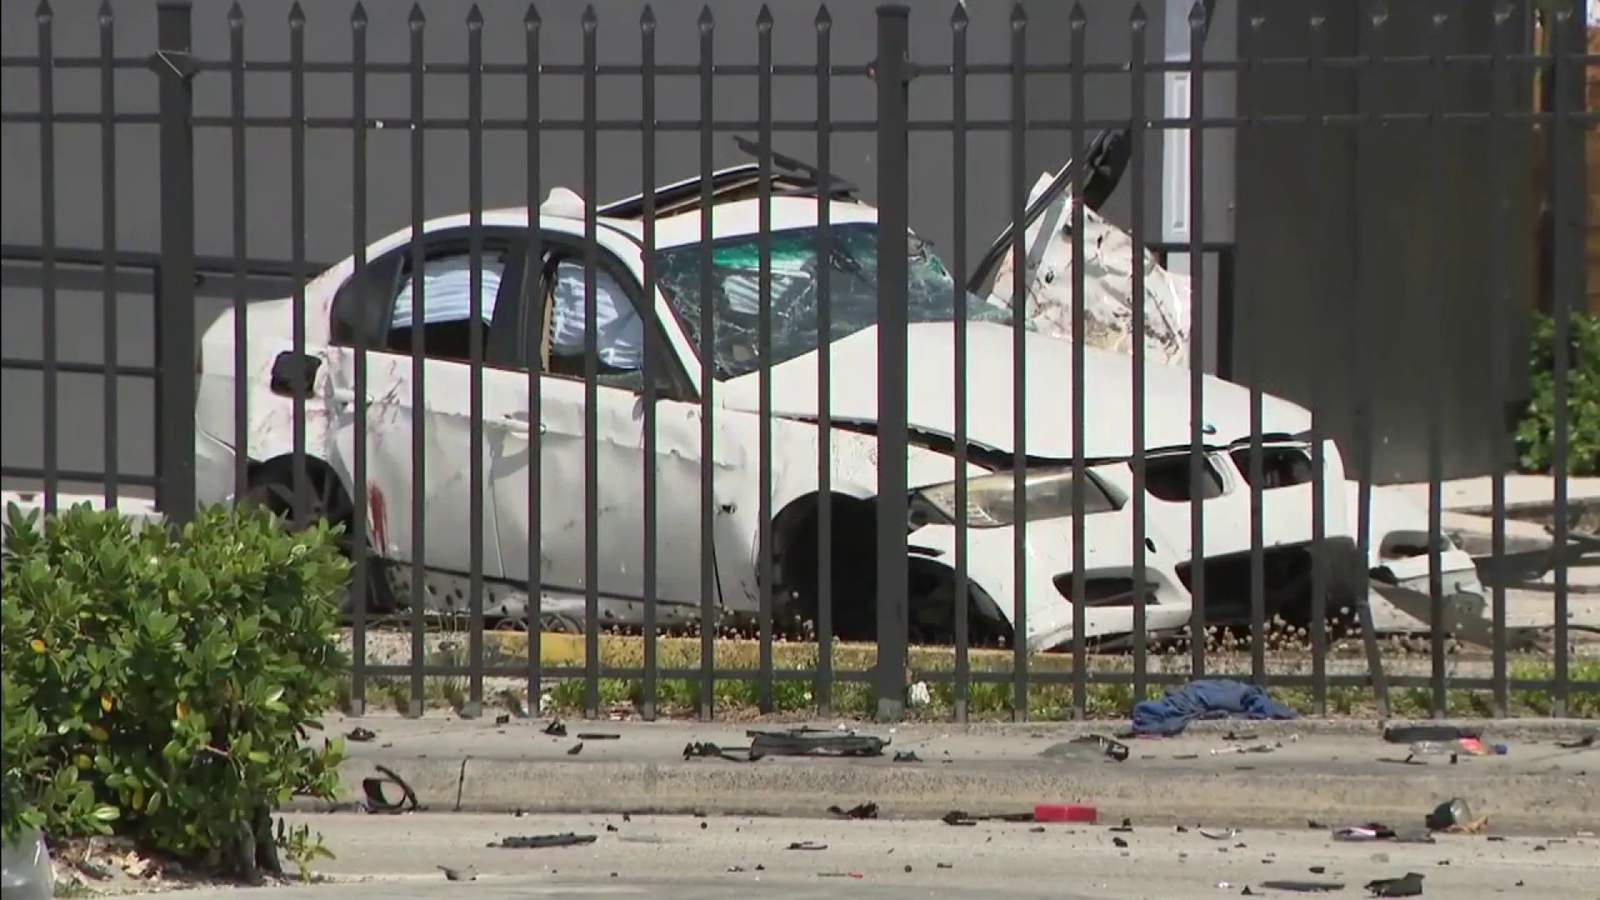 Mother and 3 children hospitalized after crash involving stolen vehicle in northwest Miami-Dade